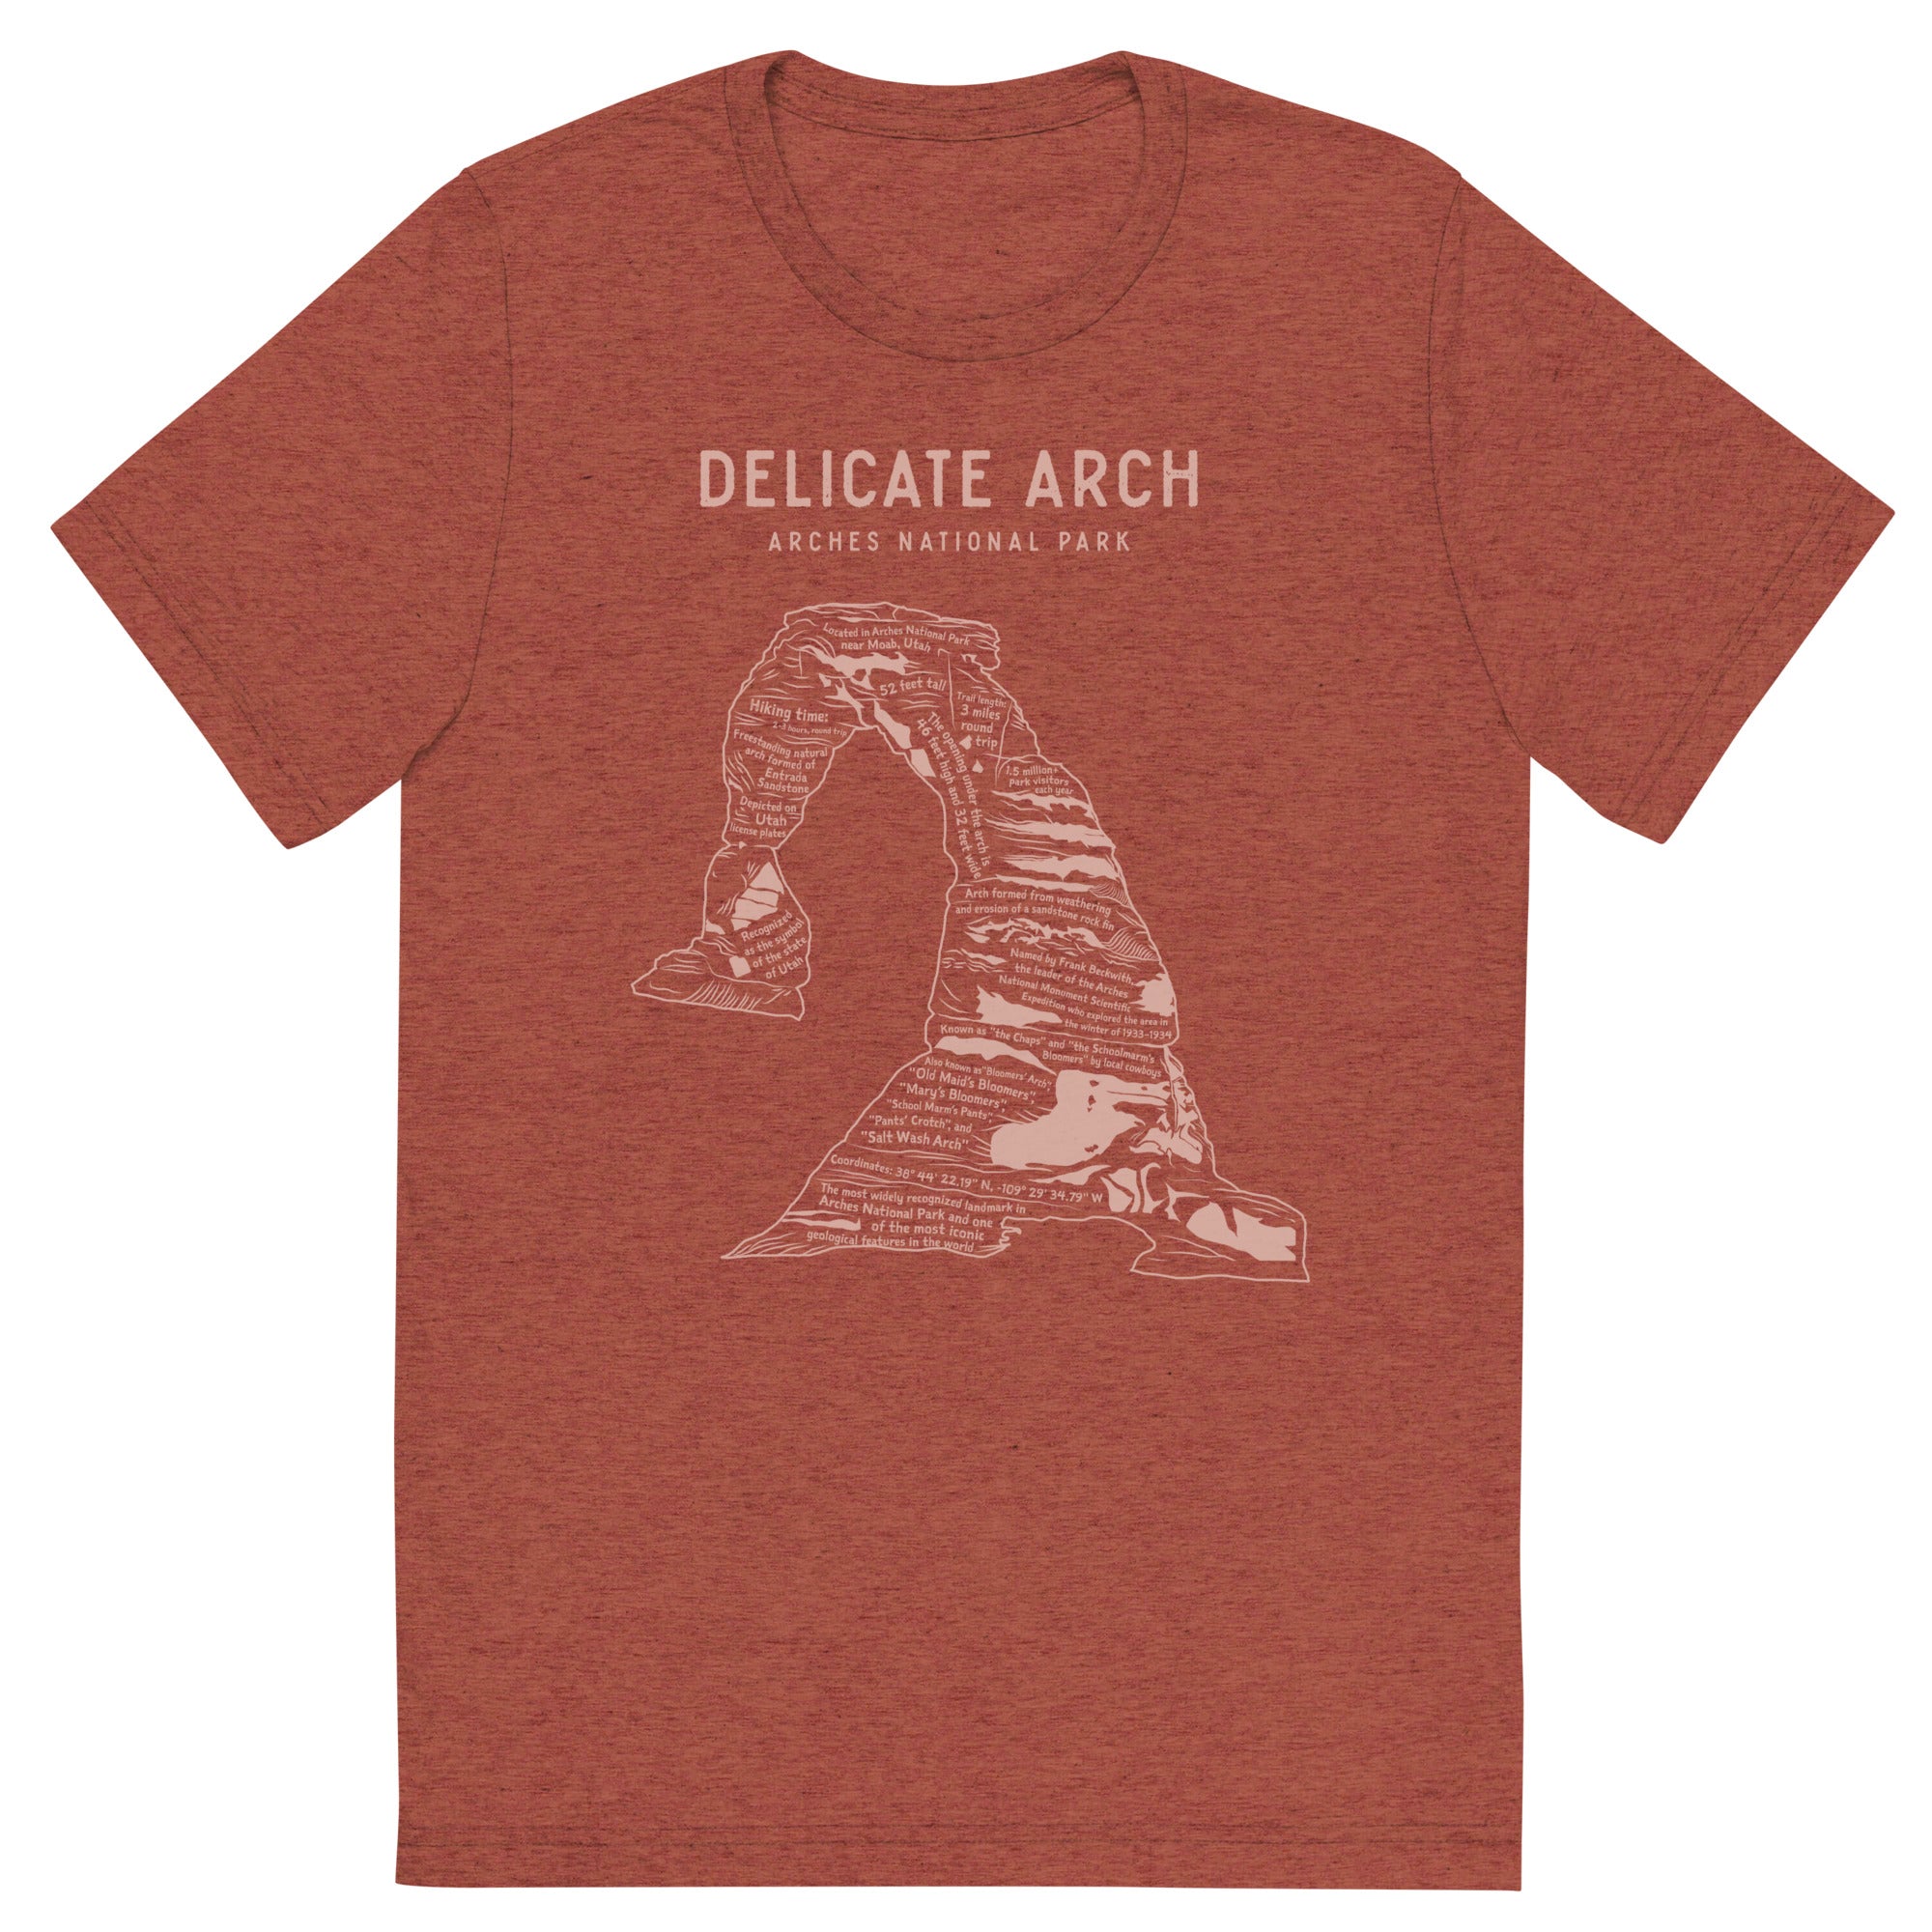 Delicate Arch Short Sleeve Shirt